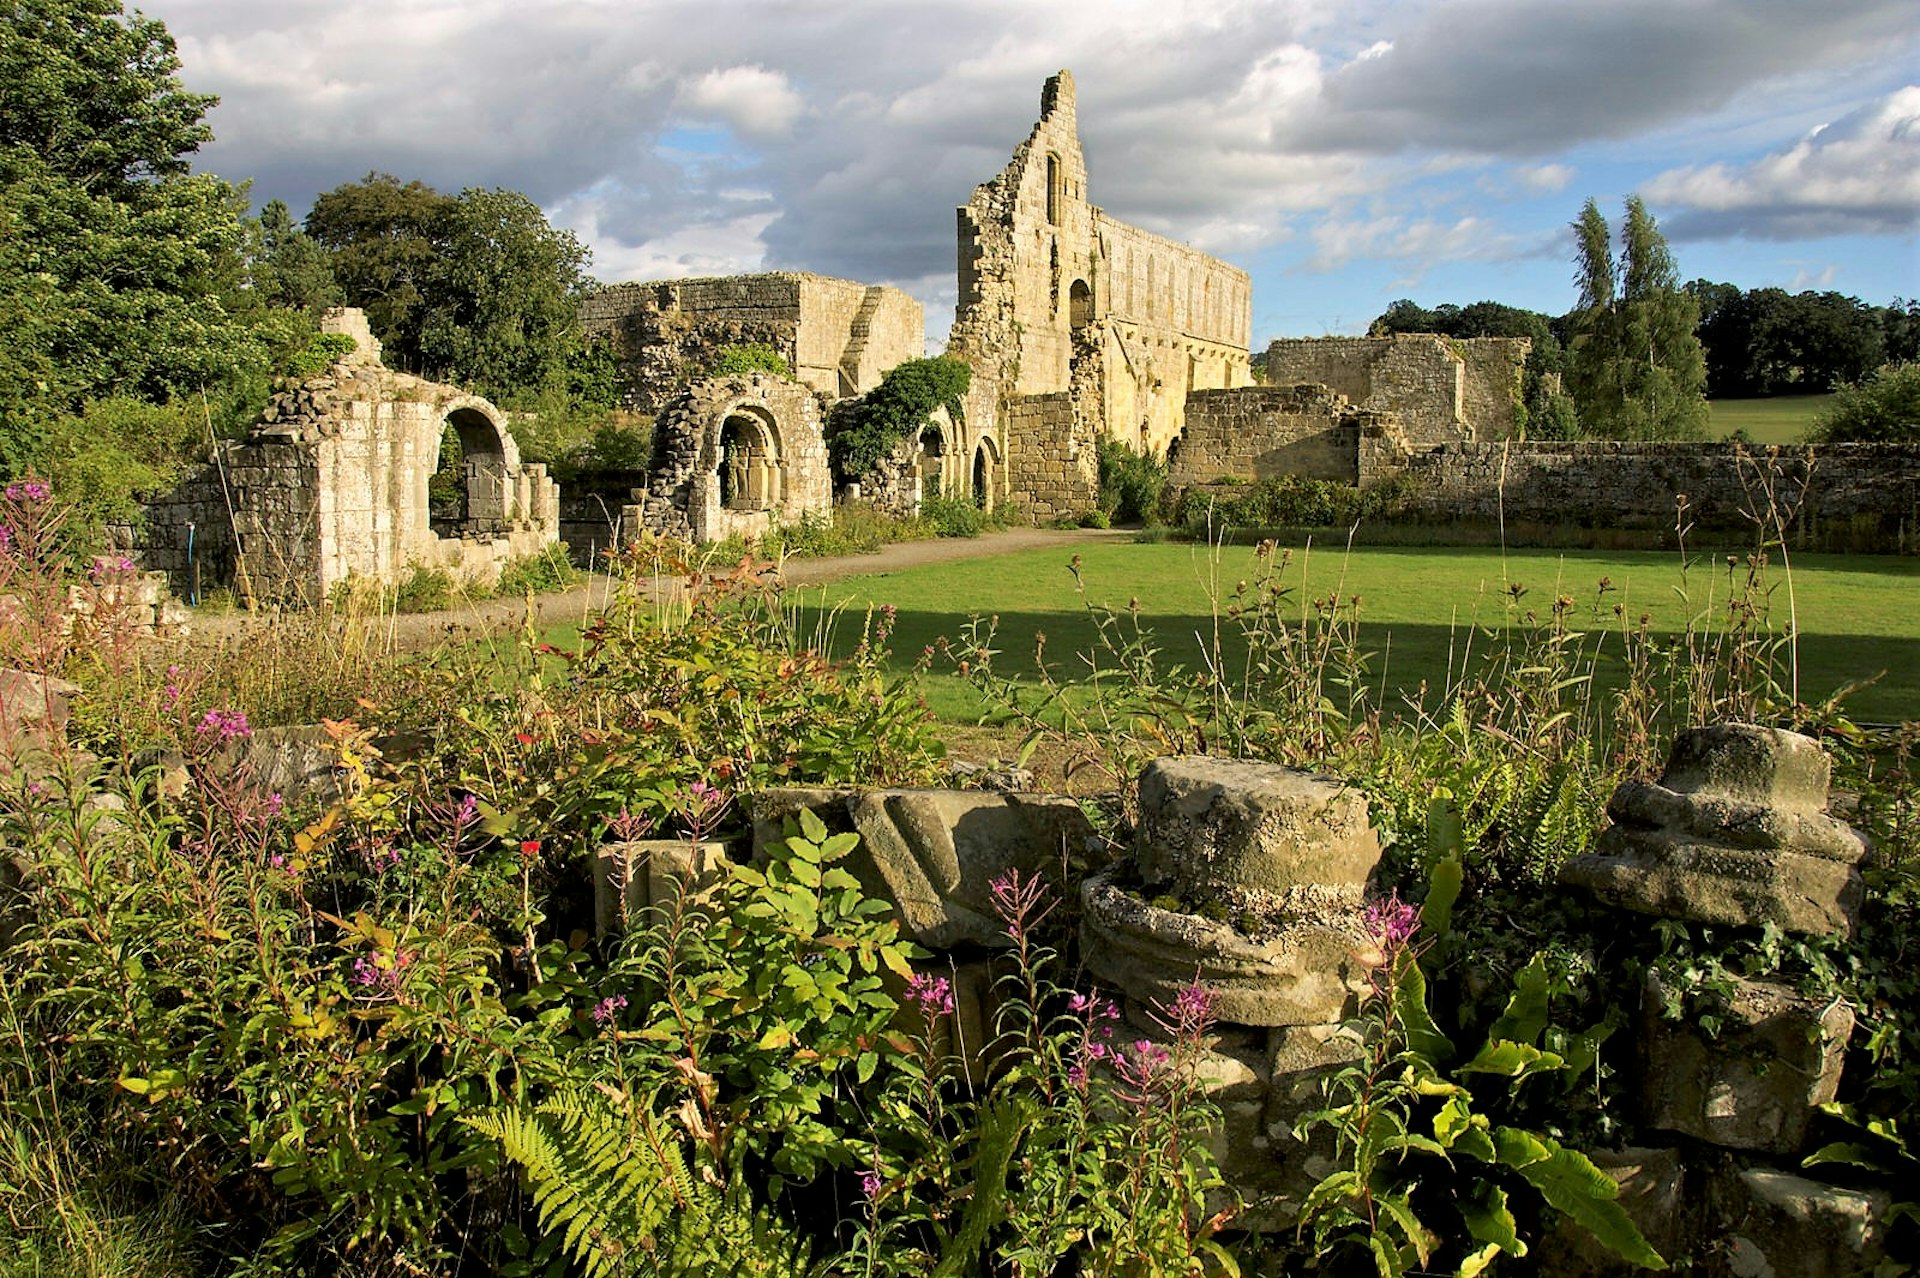 Visit Jervaulx Abbey to see where medieval monks started Yorkshire's beer history, then head to nearby Masham to taste some contemprary brews © Dennis Barnes / Getty Images